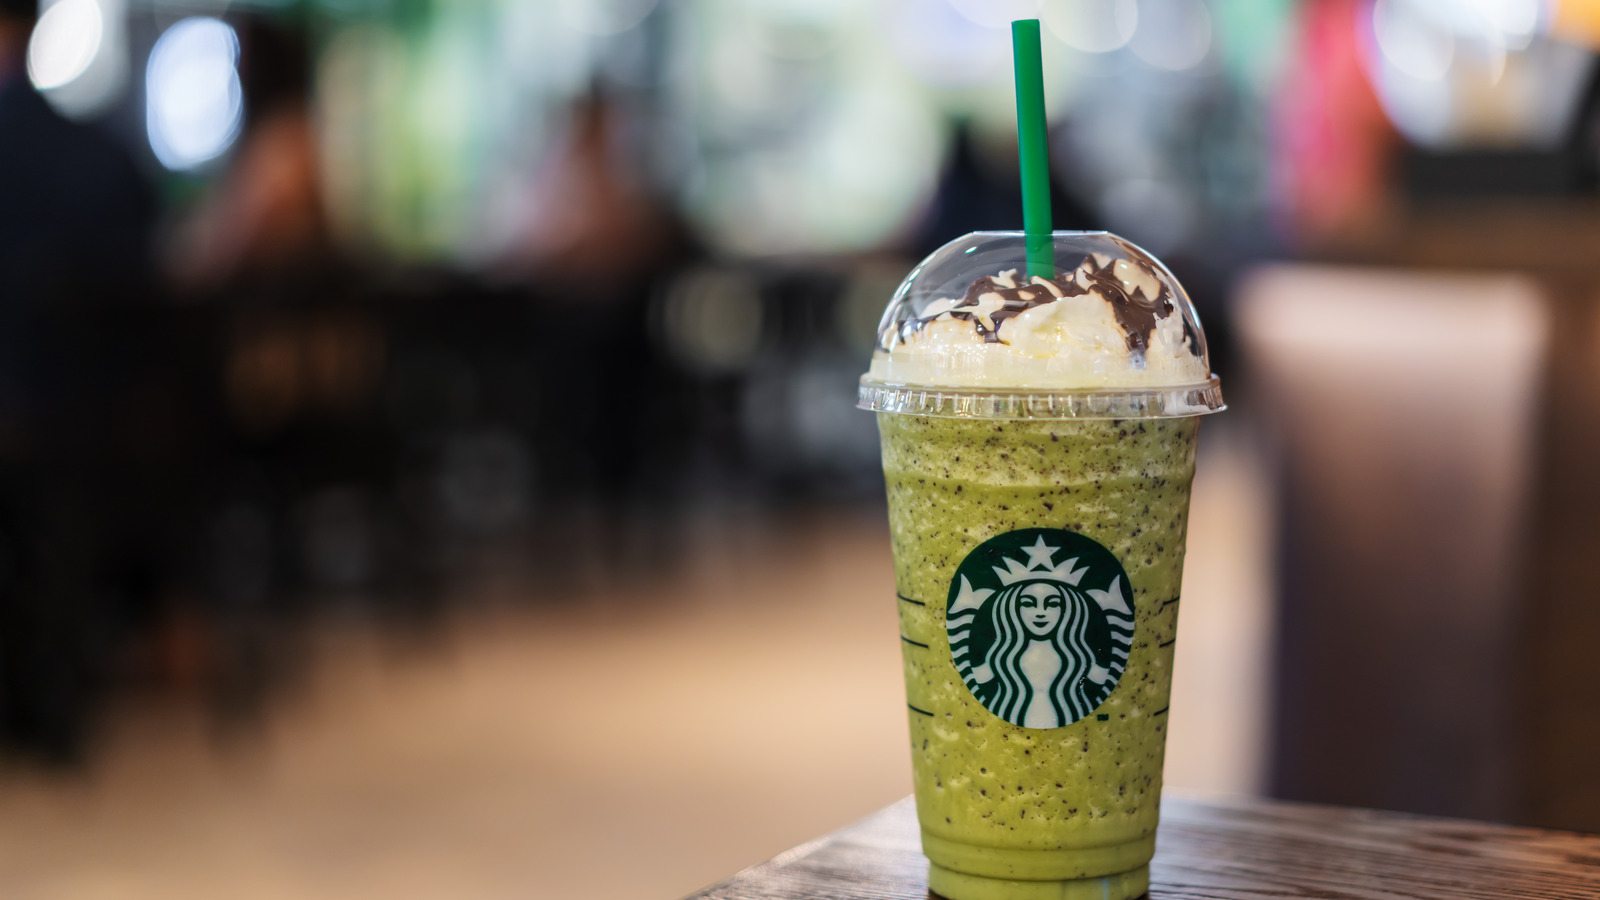 https://www.mashed.com/img/gallery/what-starbucks-employees-want-you-to-know-about-its-matcha/l-intro-1639837526.jpg